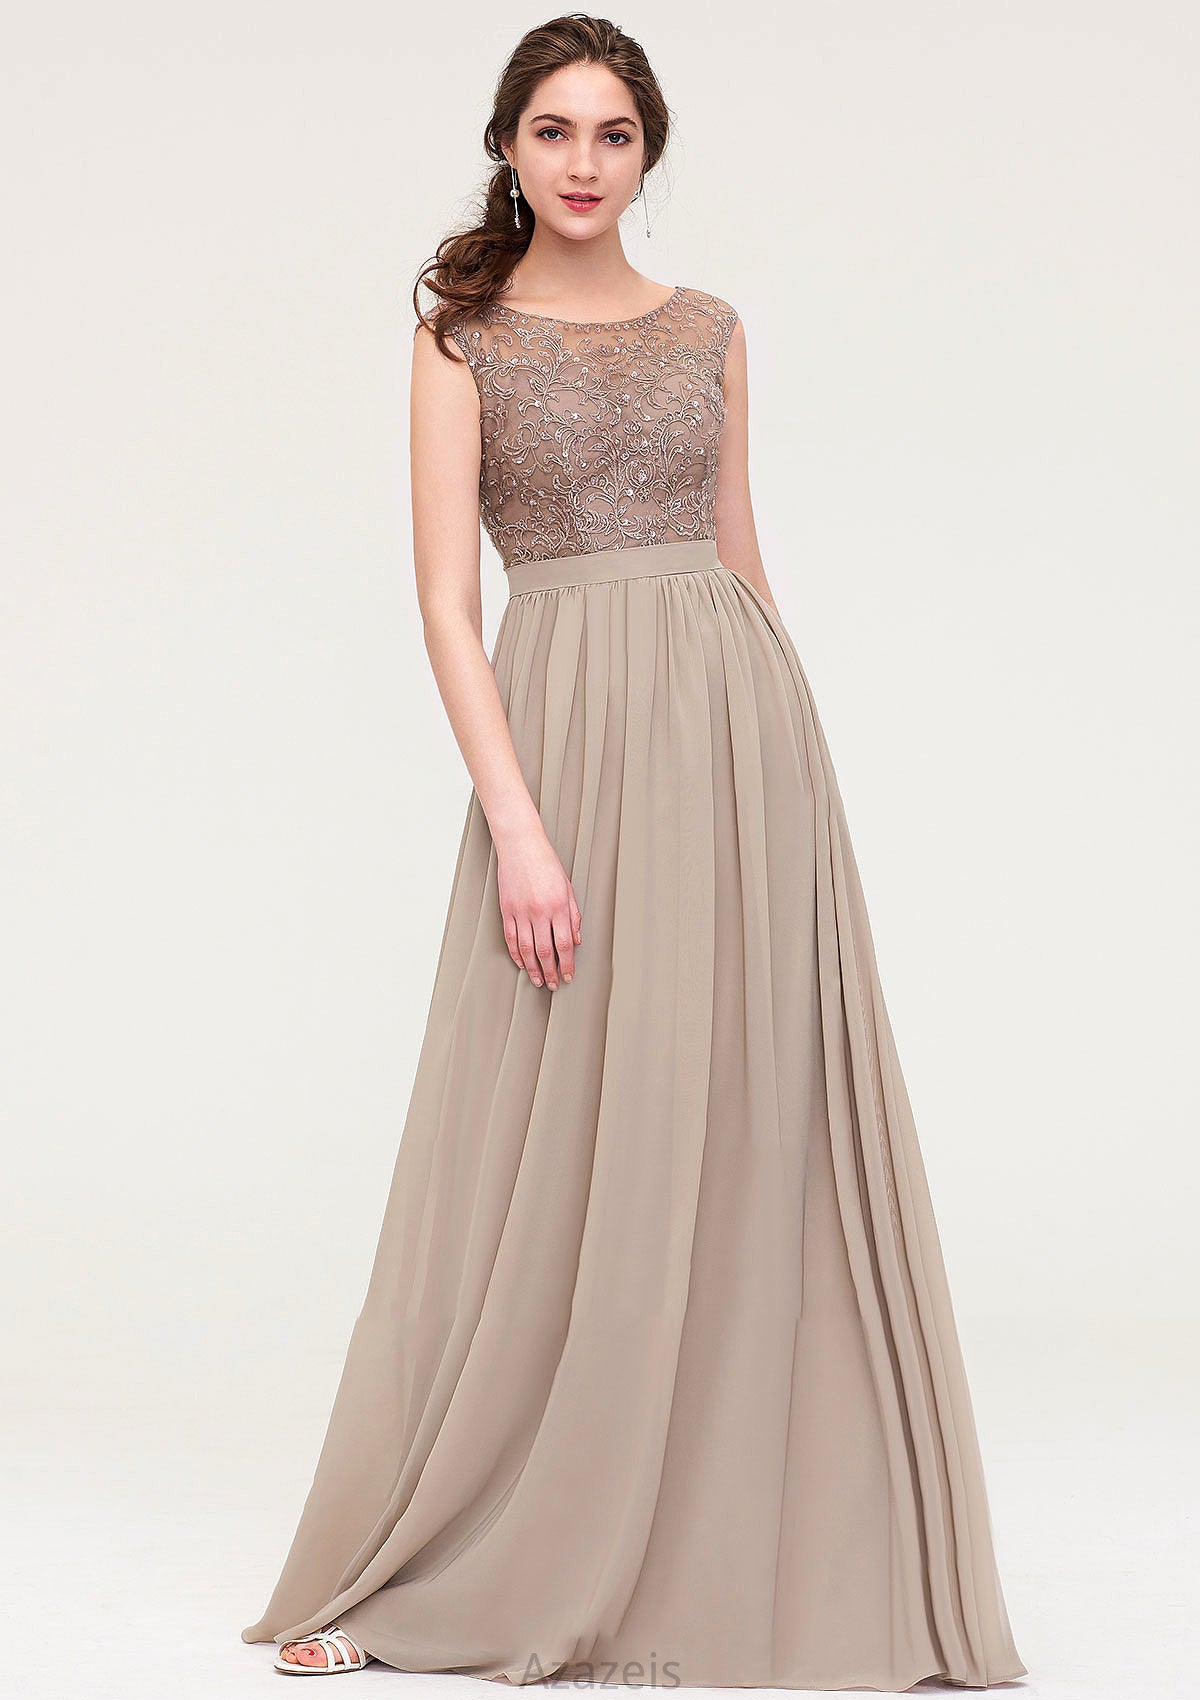 Sleeveless Scoop Neck Long/Floor-Length Chiffon A-line/Princess Bridesmaid Dresses With Sequins Beading Lace Pleated Evelin DFP0025493